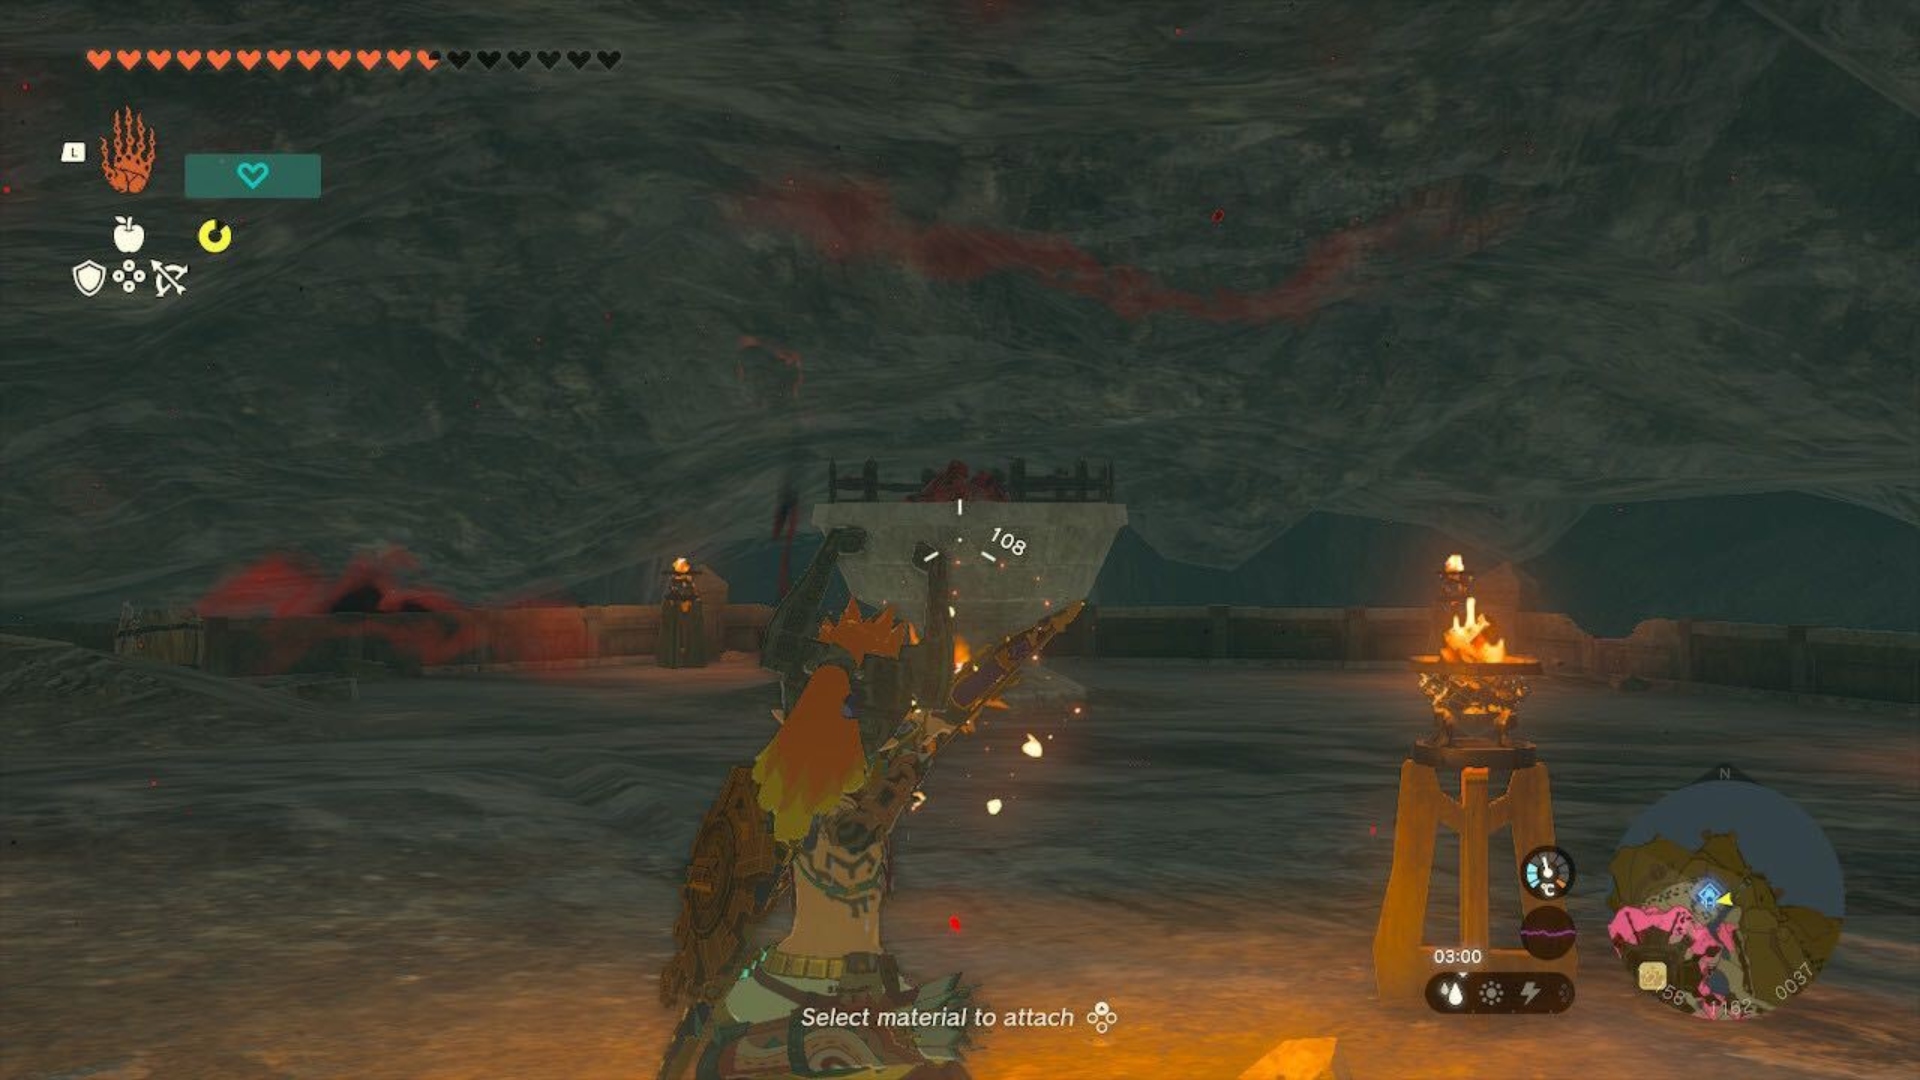 Link shooting a fire arrow at a brazier to get the Hylian Shield in Tears of the Kingdom.